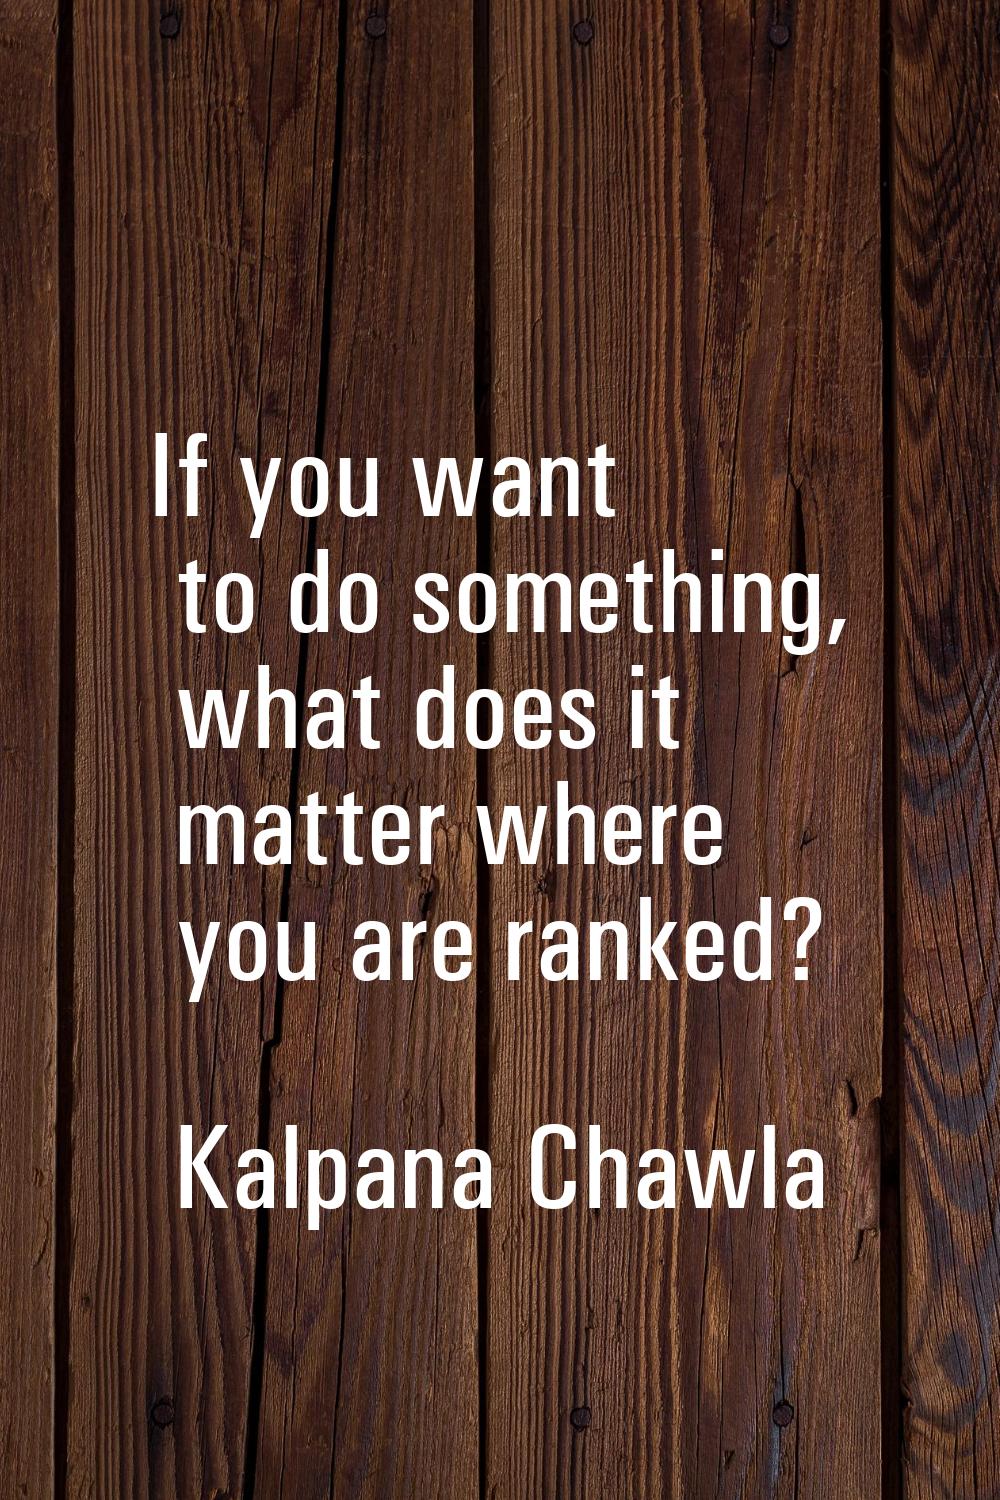 If you want to do something, what does it matter where you are ranked?